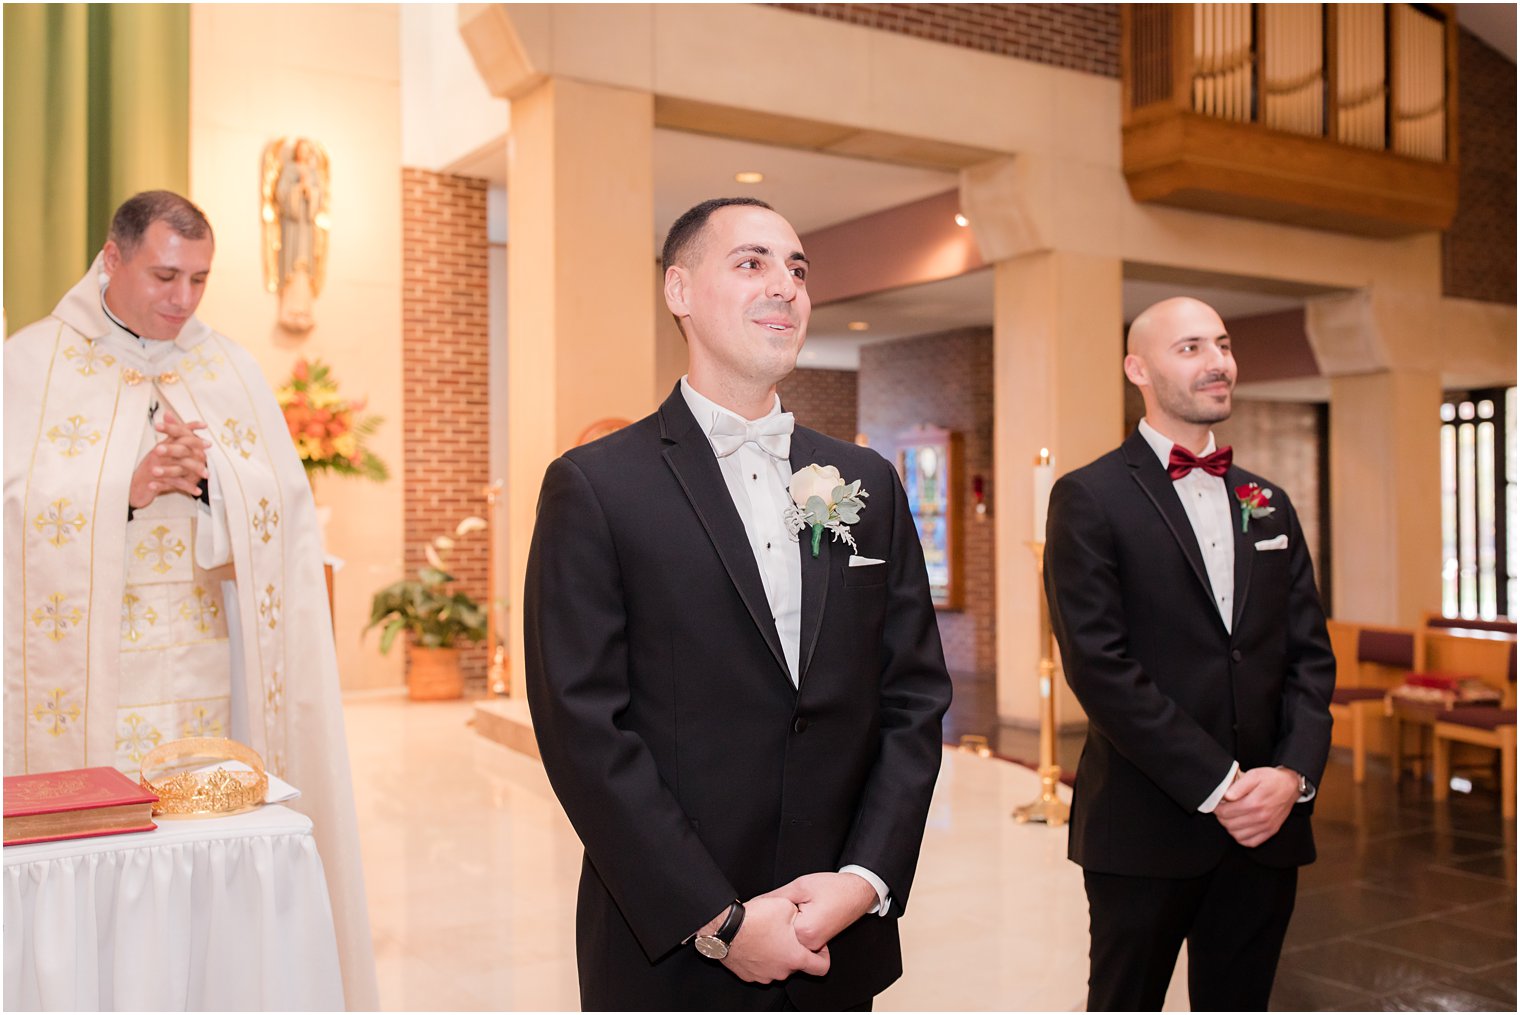 traditional church wedding in New Jersey photographed by Idalia Photography